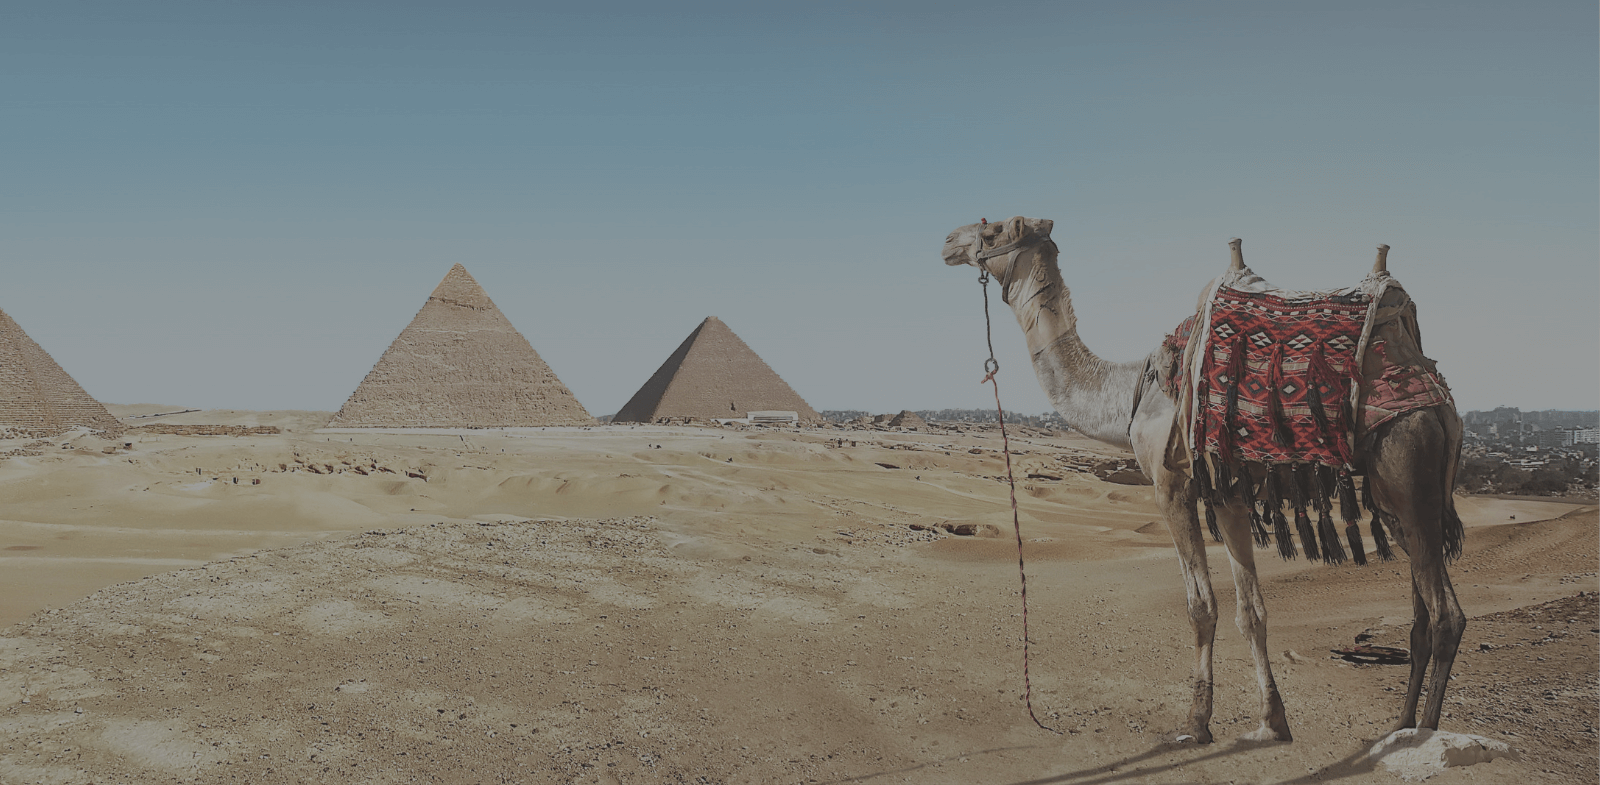 Camel in the desert with pyramids